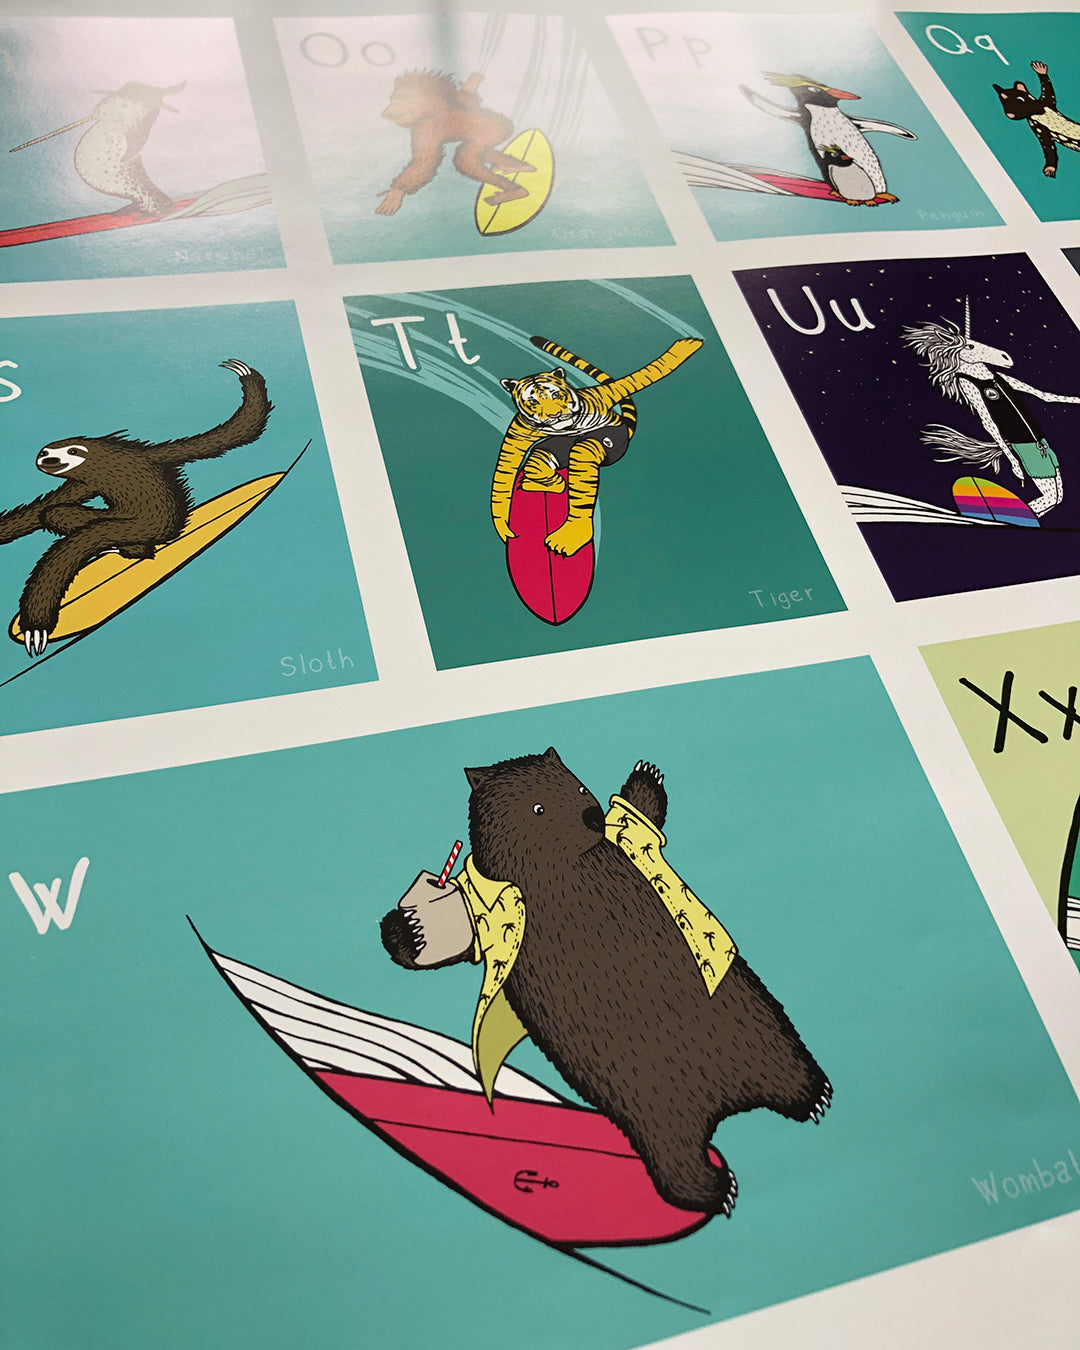 
                  
                    The Surfing Animals ABC Poster - 24x36" (61x91cm)
                  
                